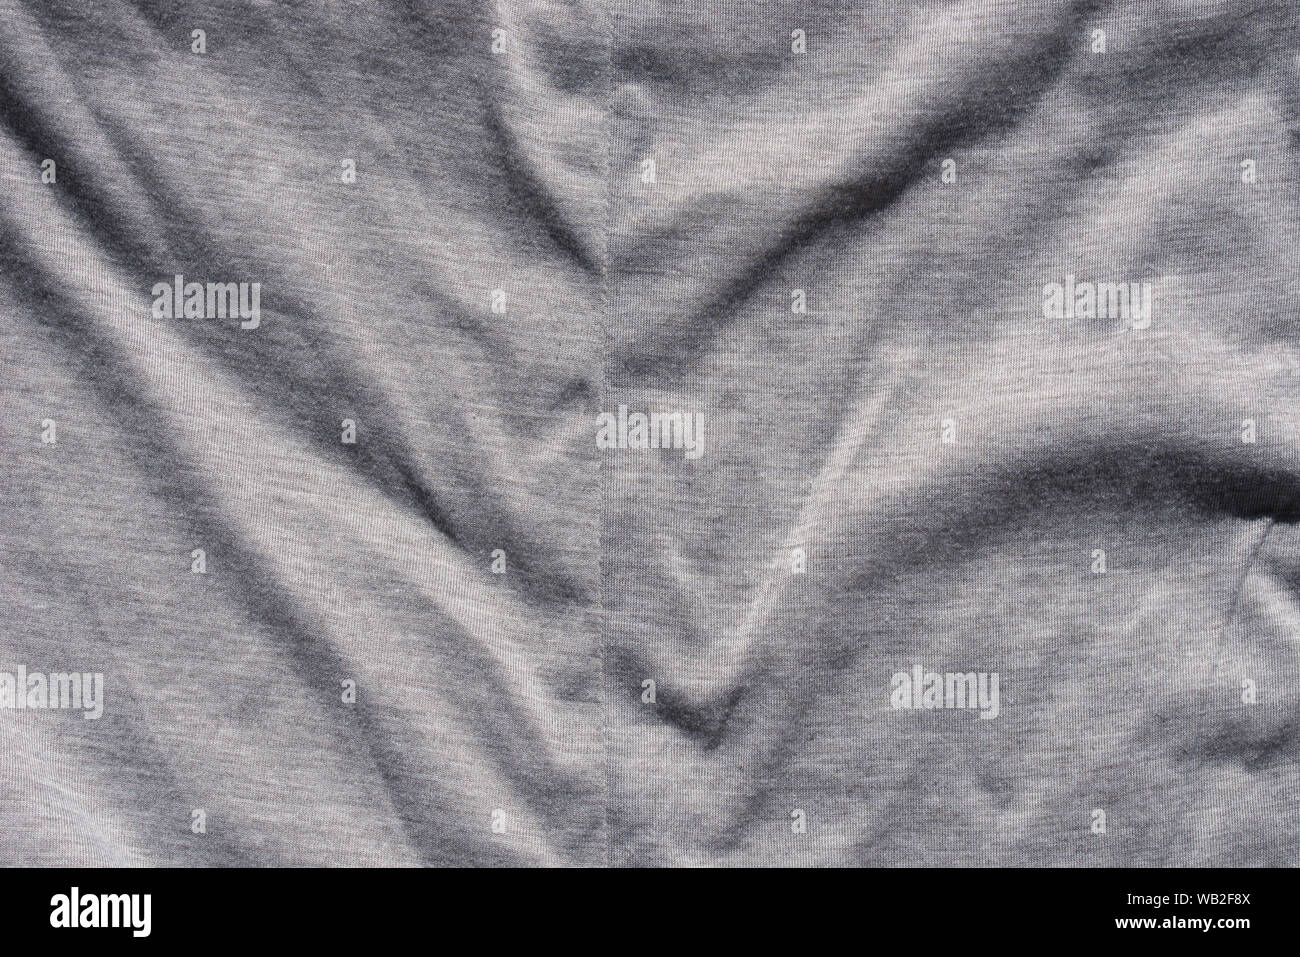 White cotton fabric texture. Clothes cotton jersey background with folds  Stock Photo